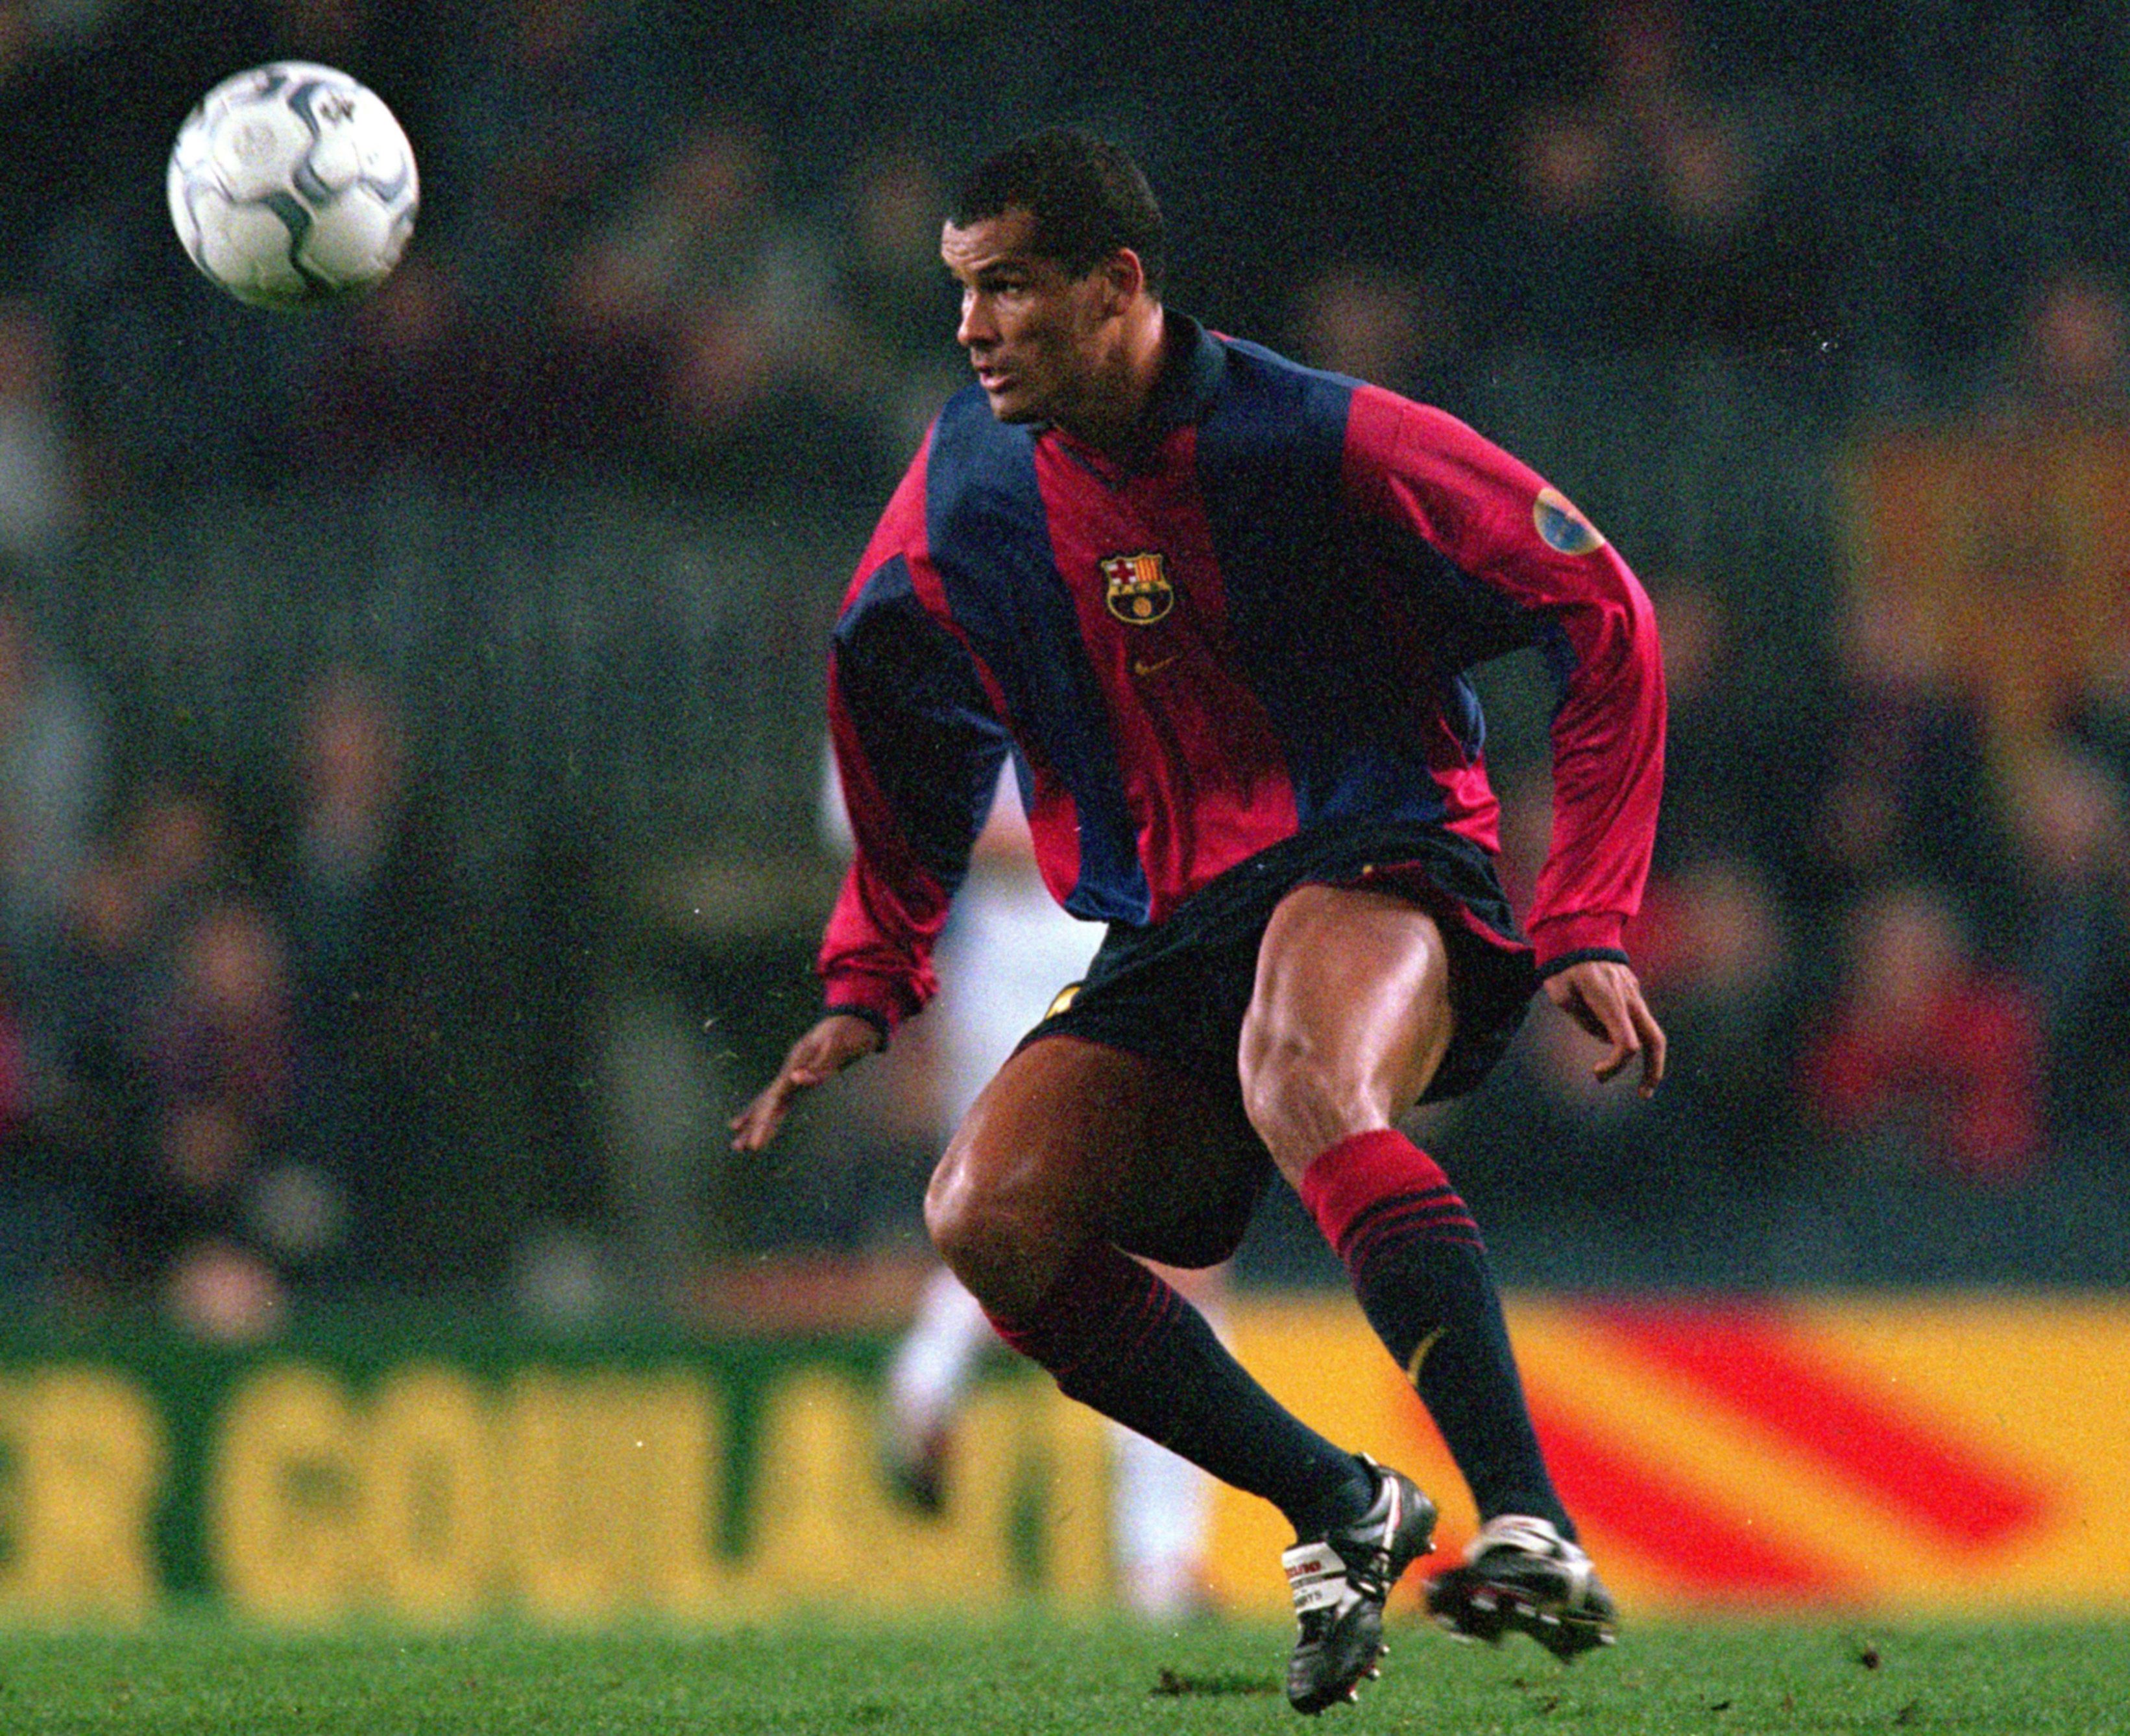 Rivado in action with Barcelona